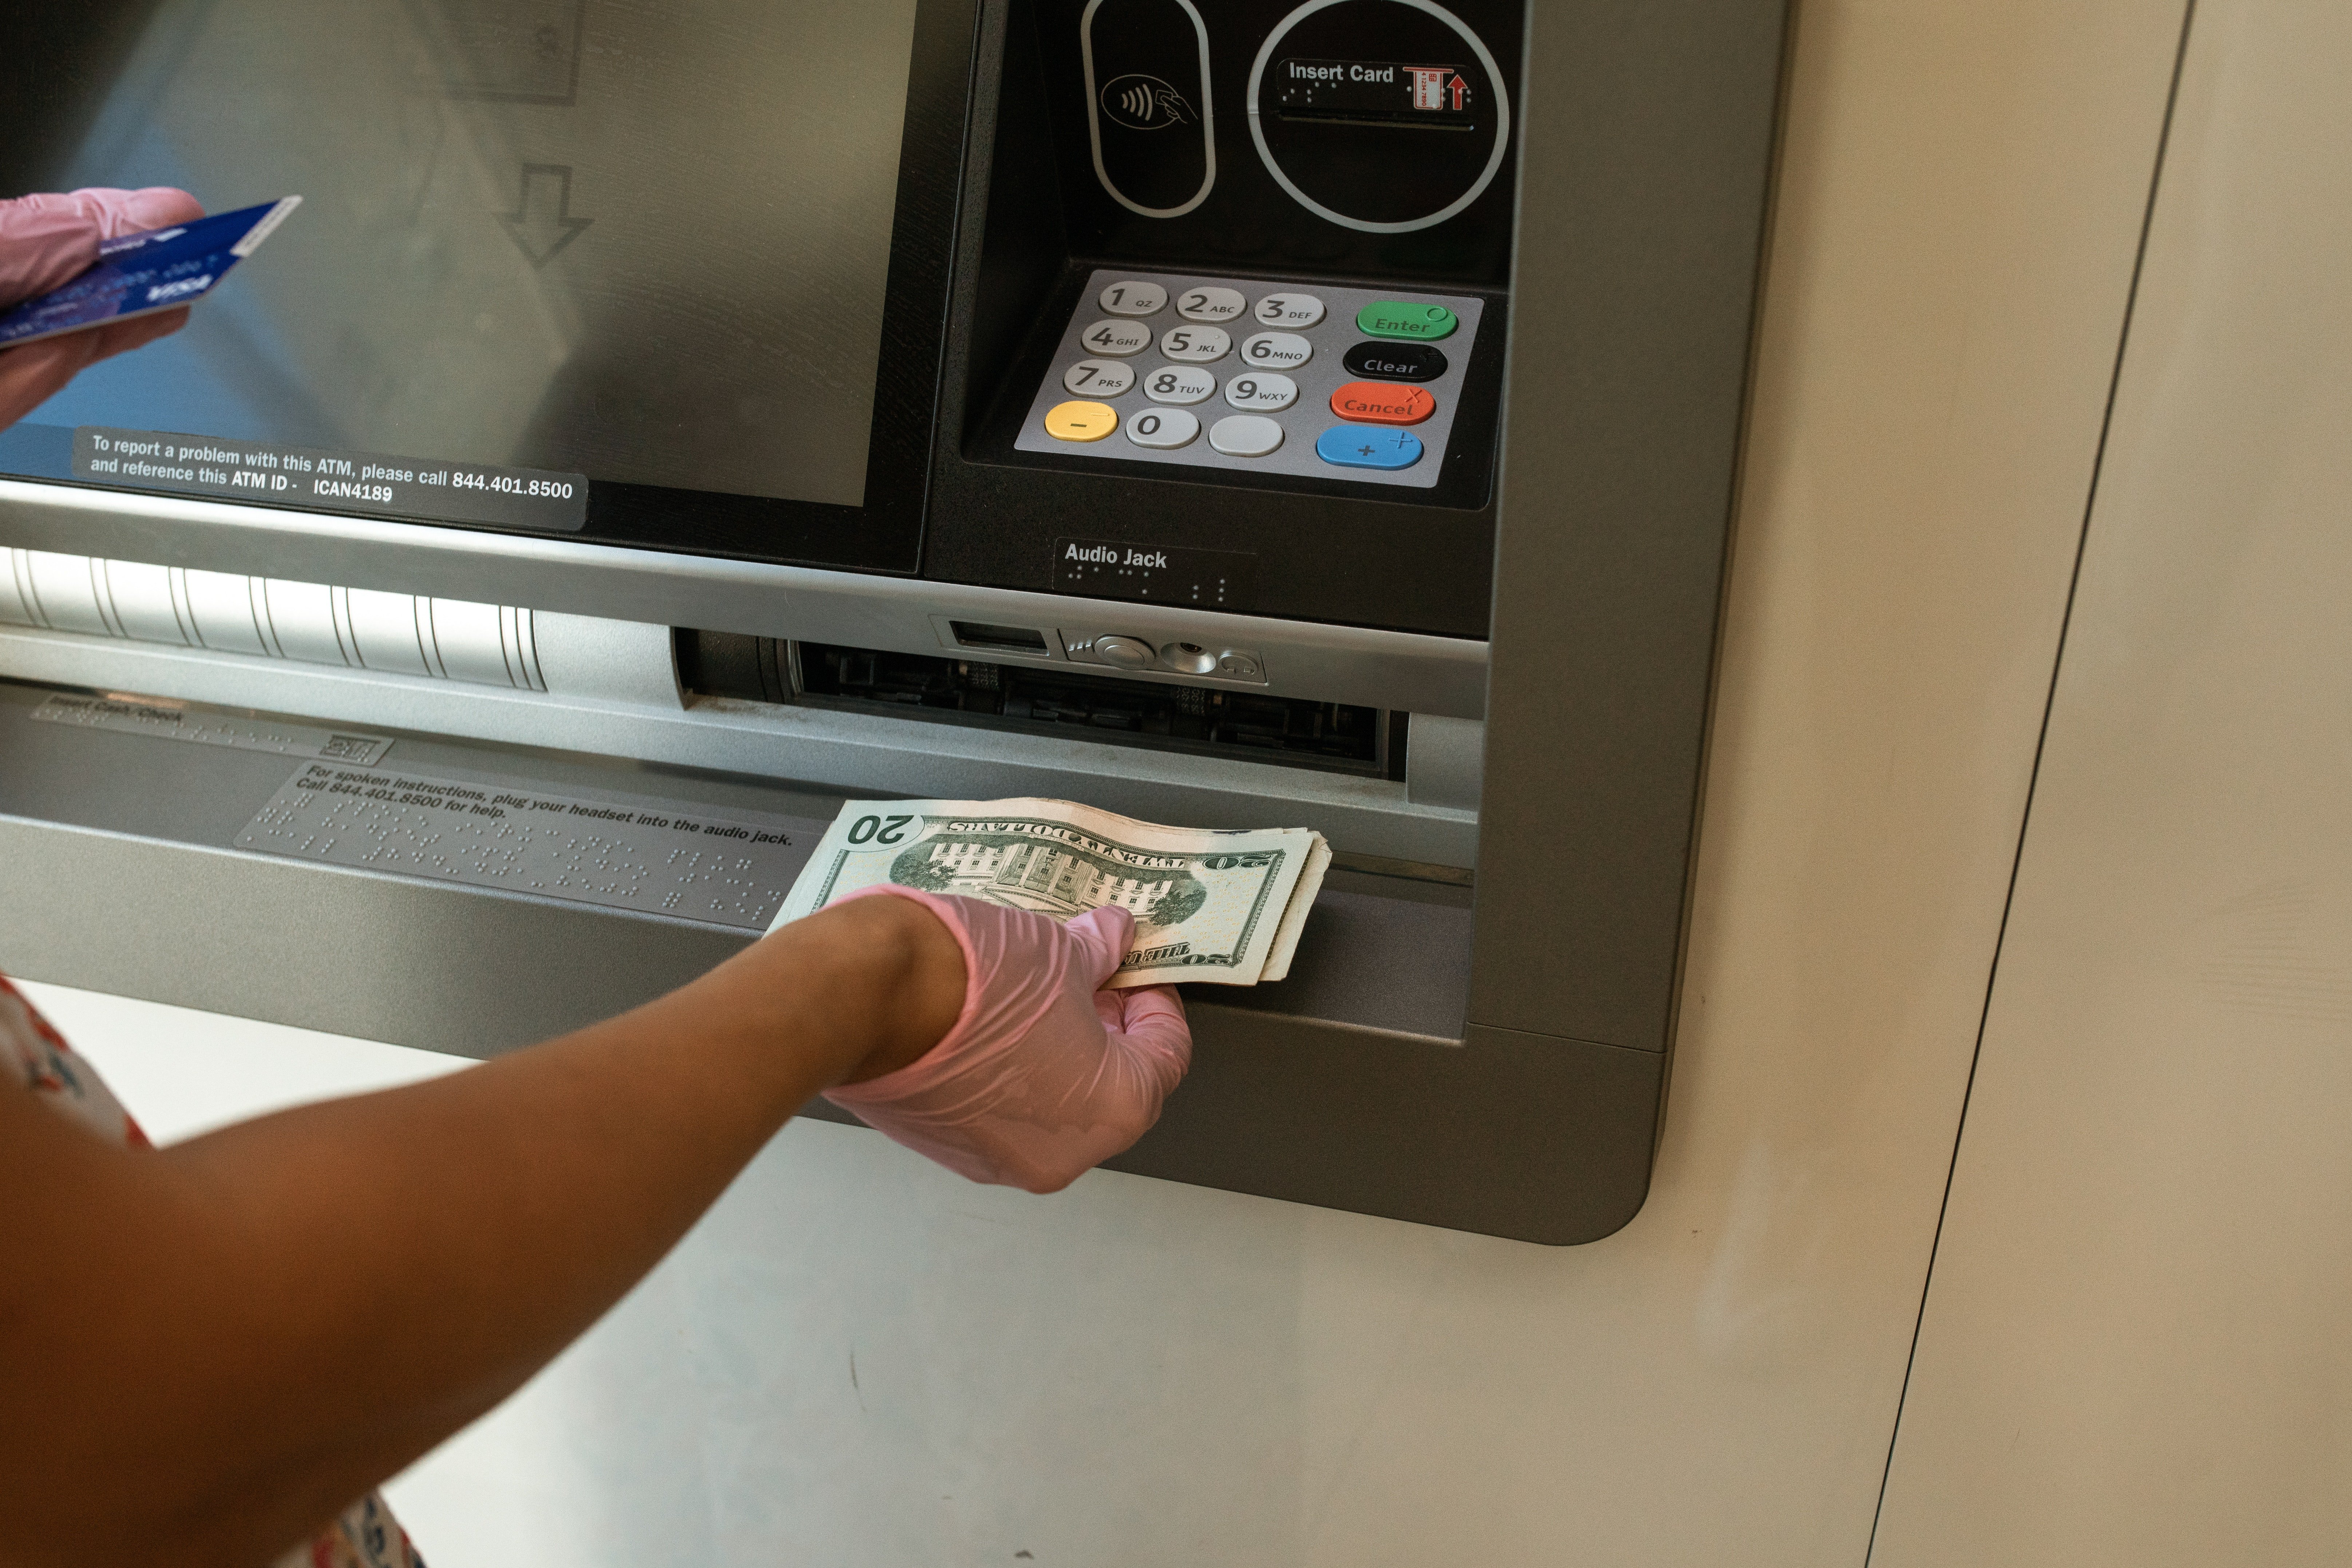 A customer withdrawing monet from an ATM | Source: Pexels